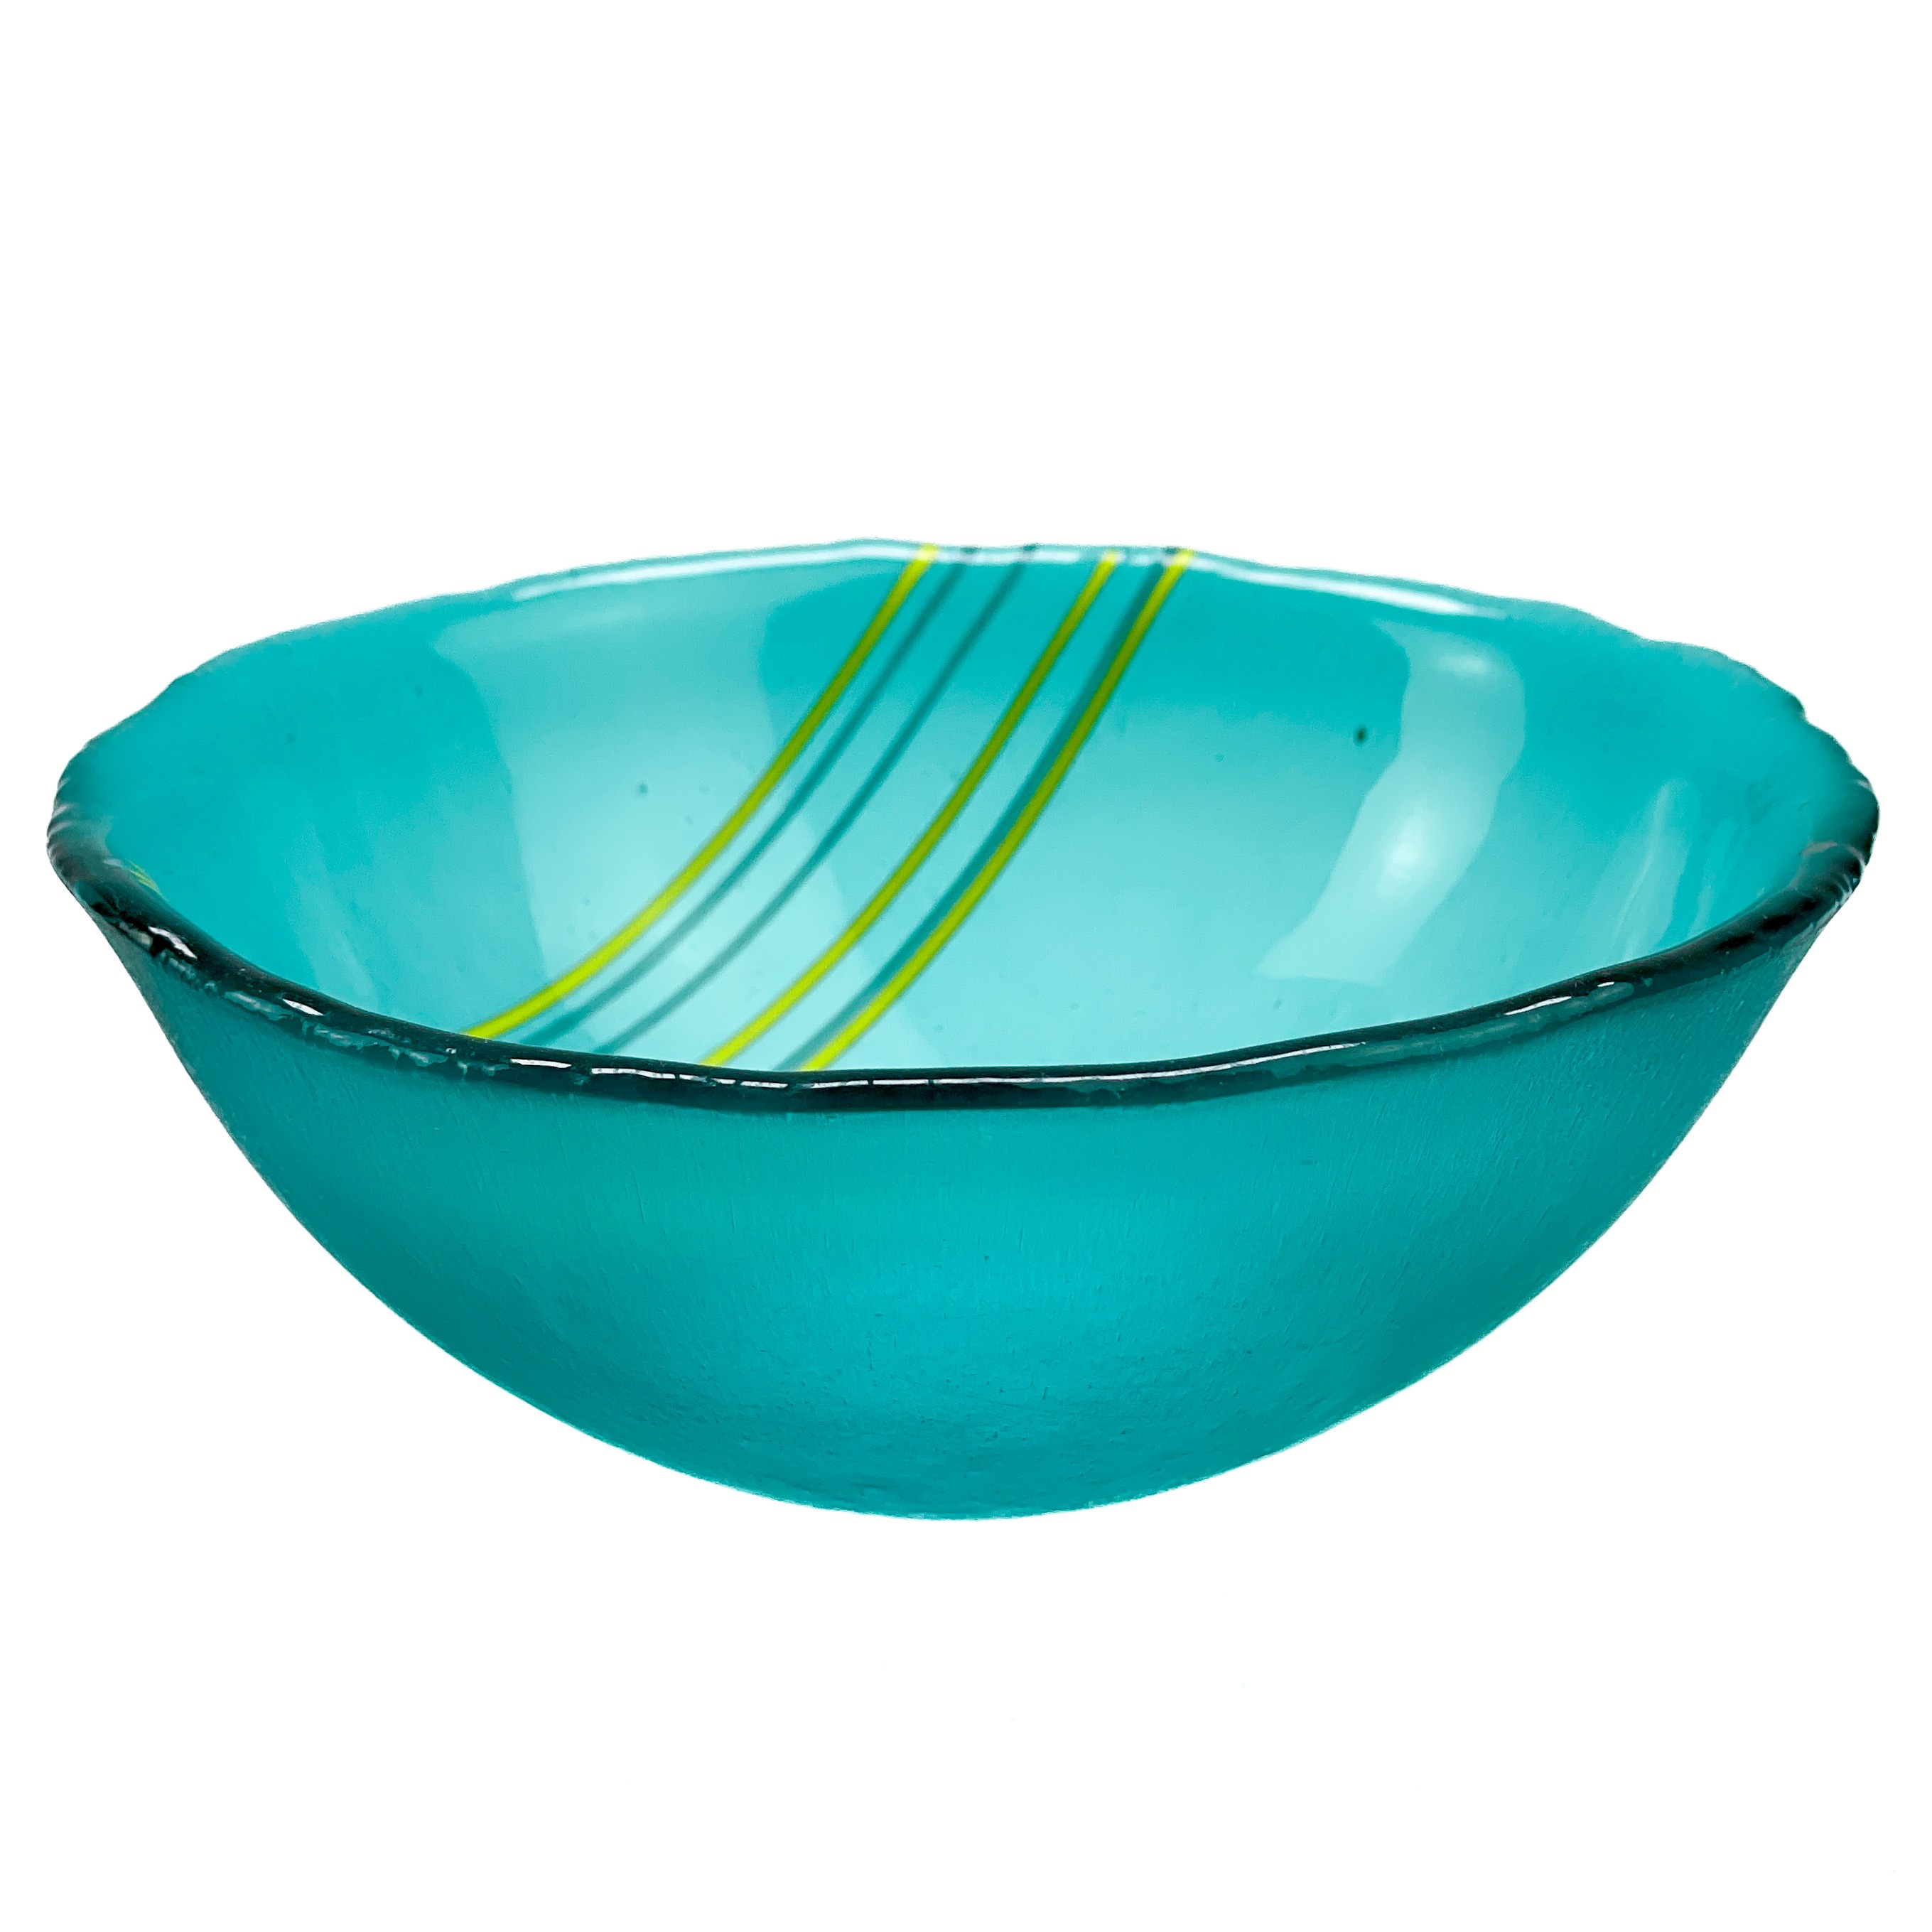 Serena RADCLIFFE Eight Glass Art Bowls - Image 6 of 18